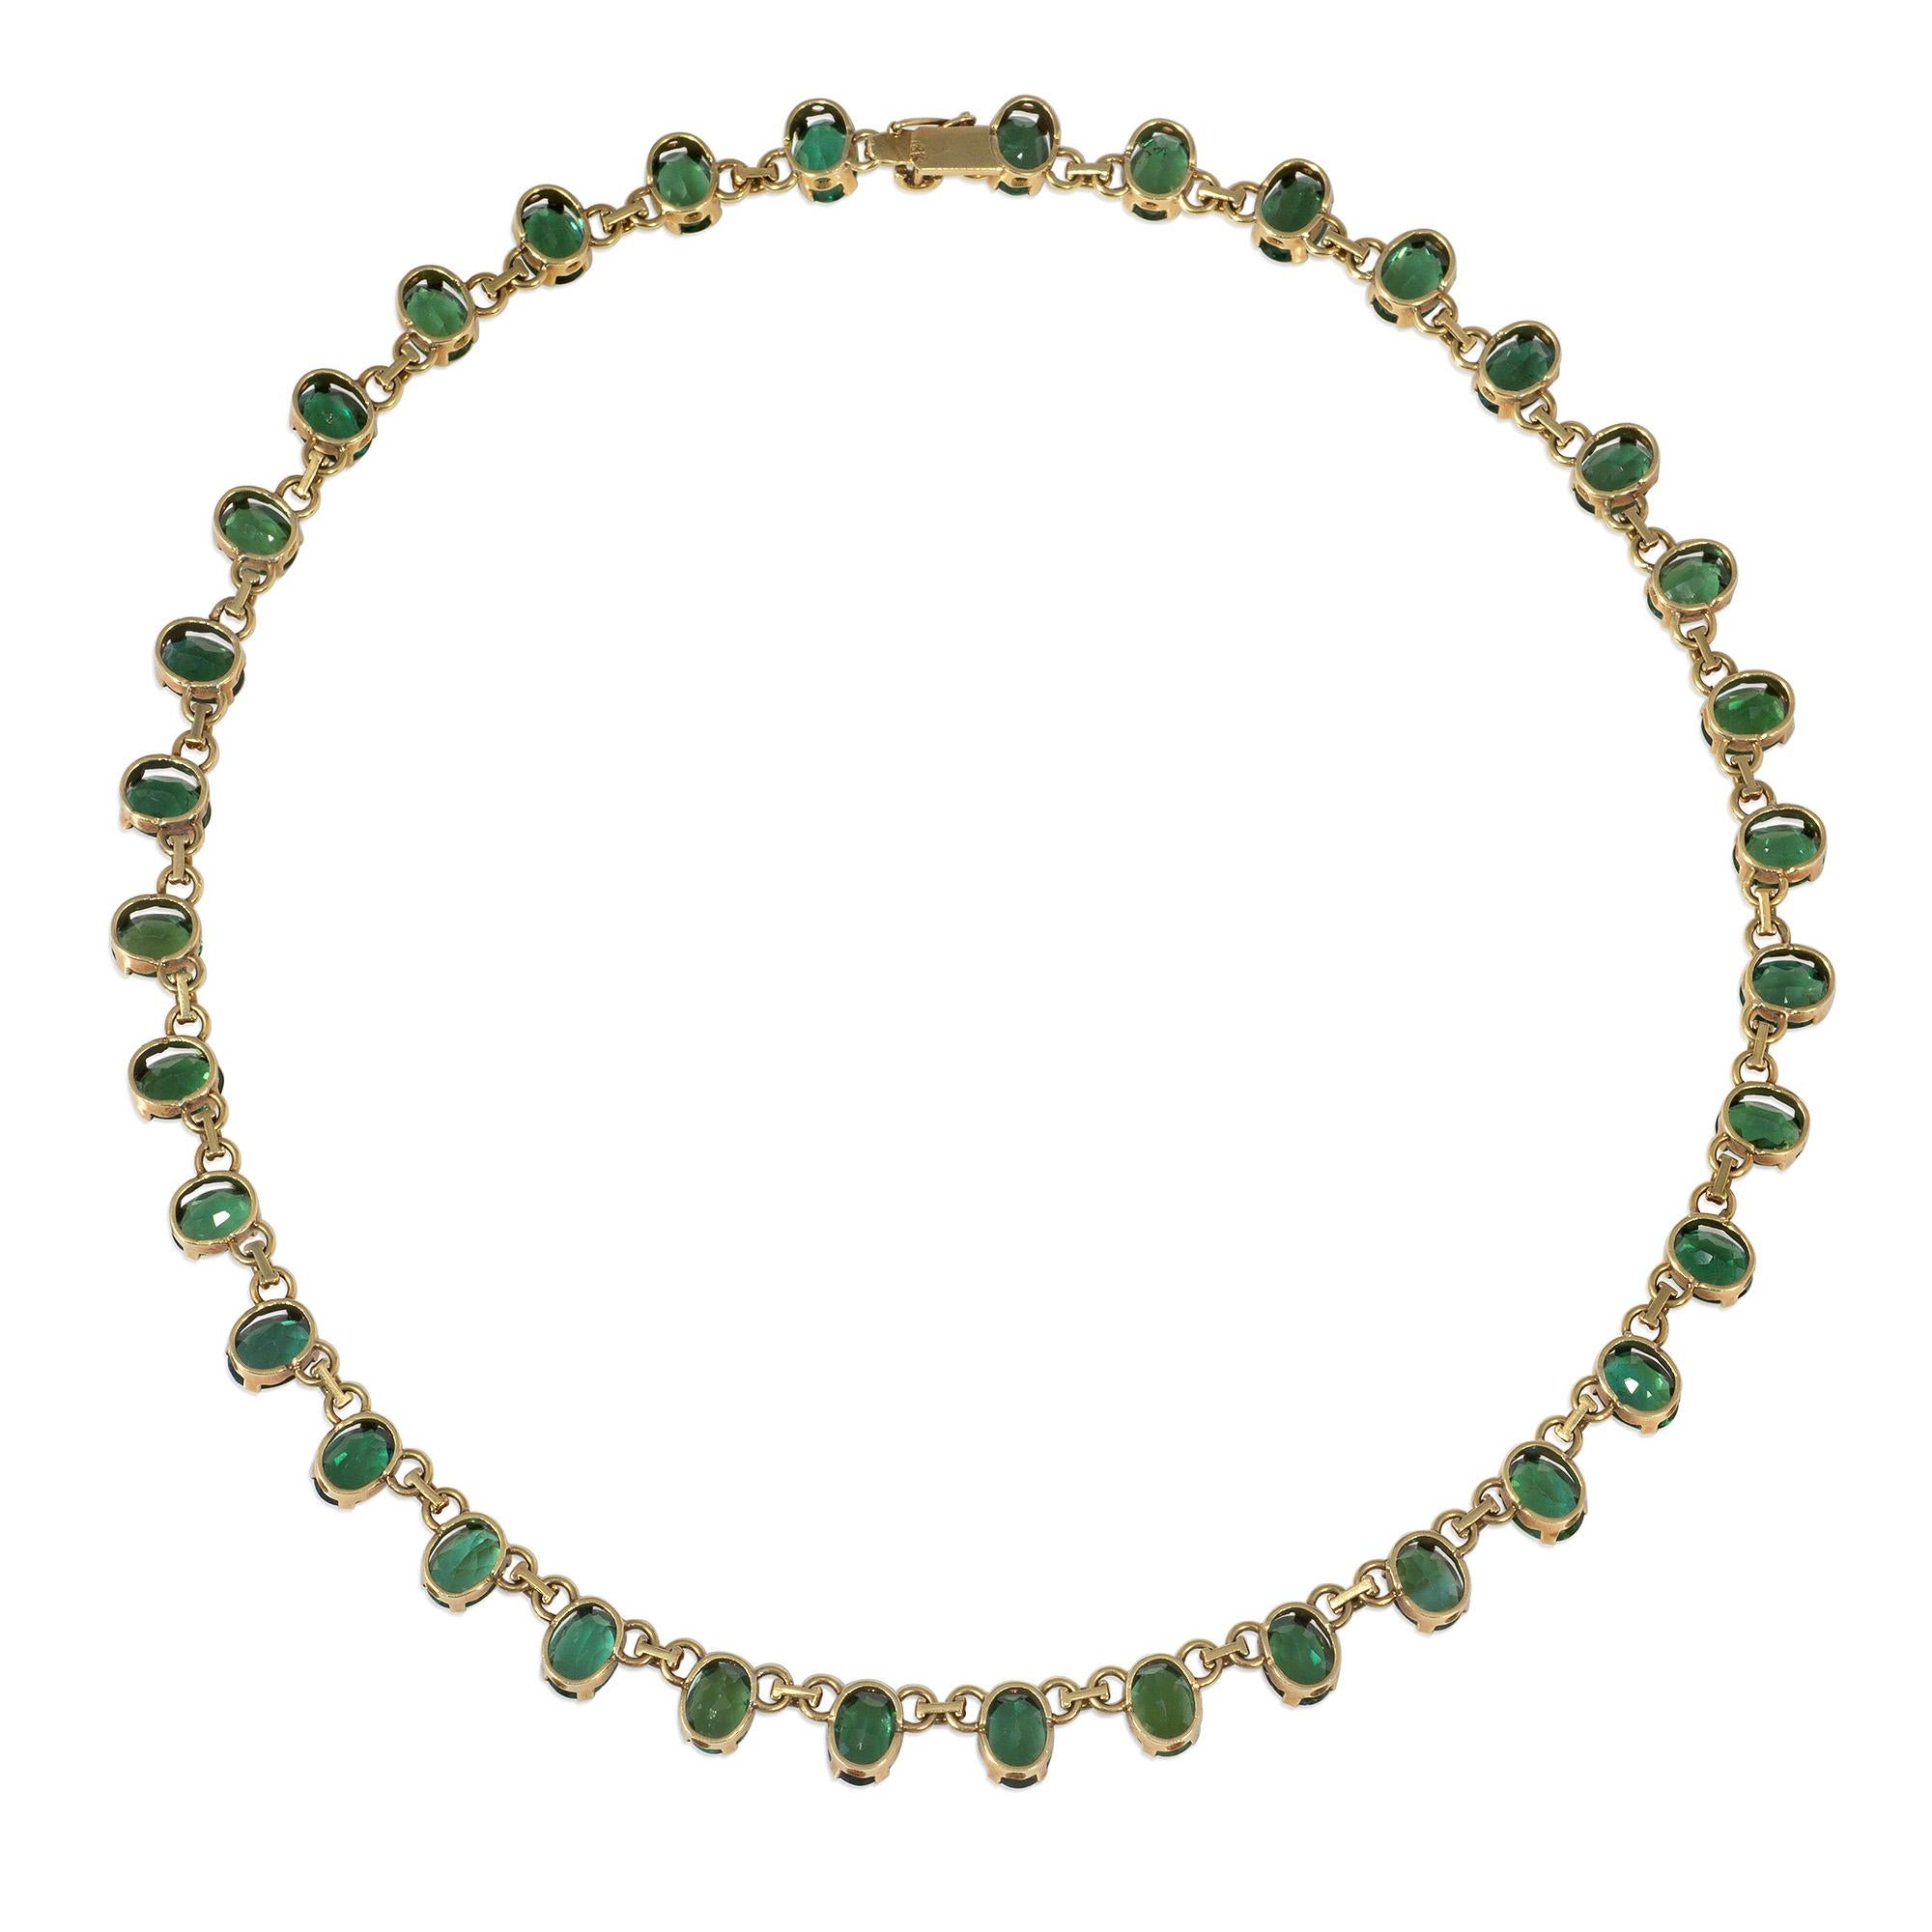 A mid-century 1950s gold and tourmaline rivière style necklace comprised of oval-cut green tourmalines with ribbed link spacers, completed by a tongue and box closure with a safety mechanism, in 18k.  H Stern.

* Includes letter of authenticity
*